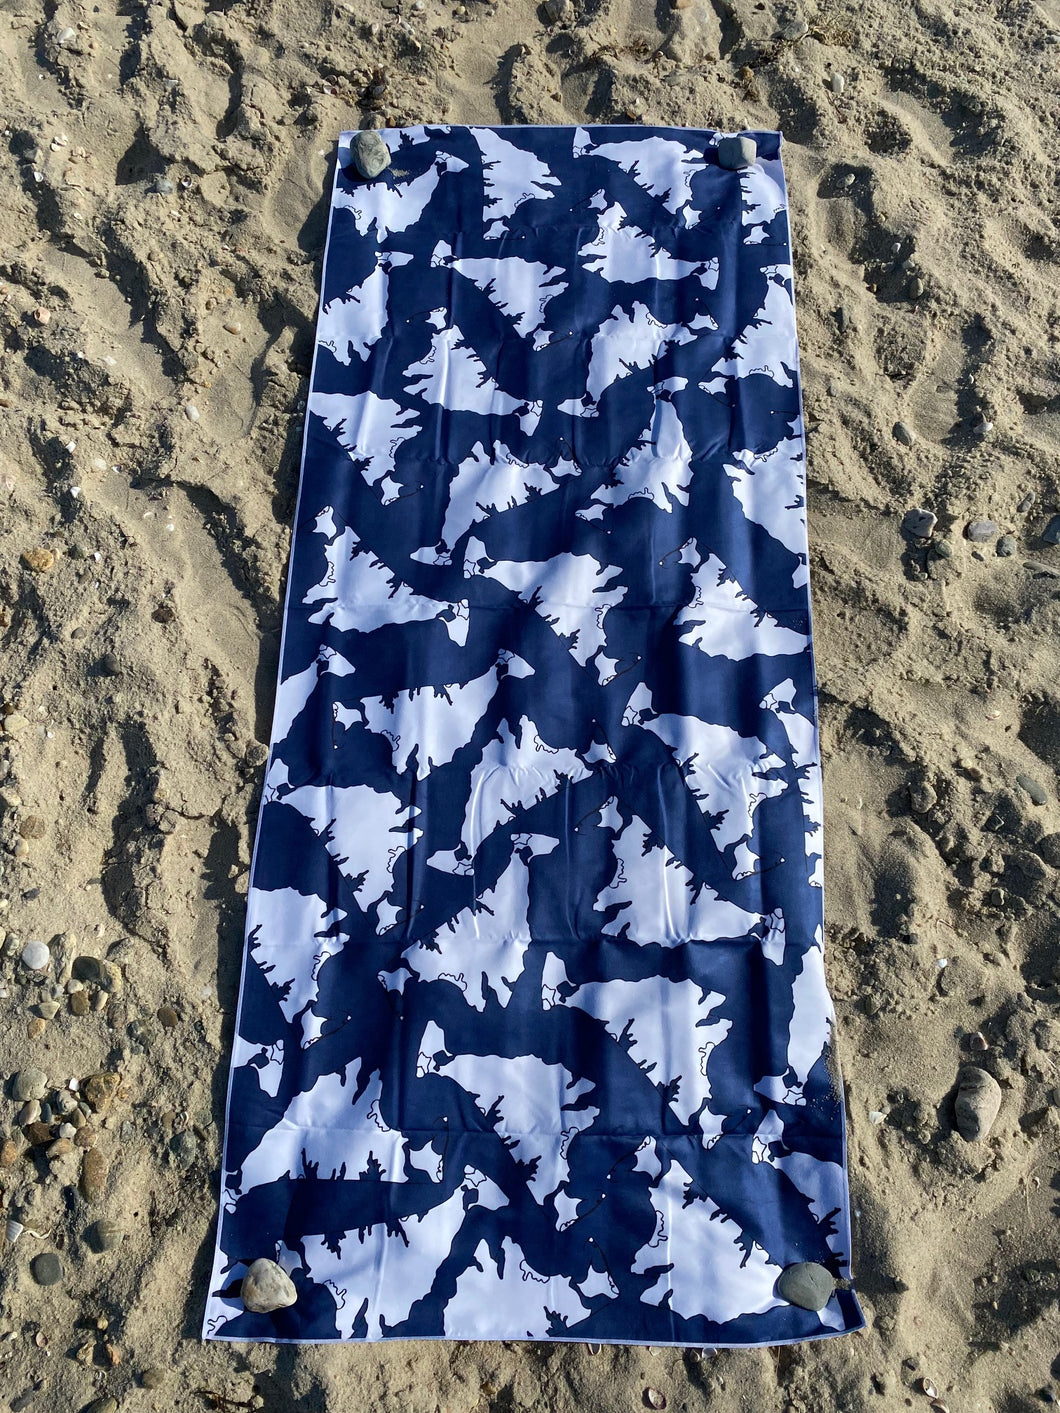 Our Sustainable Summer Towels